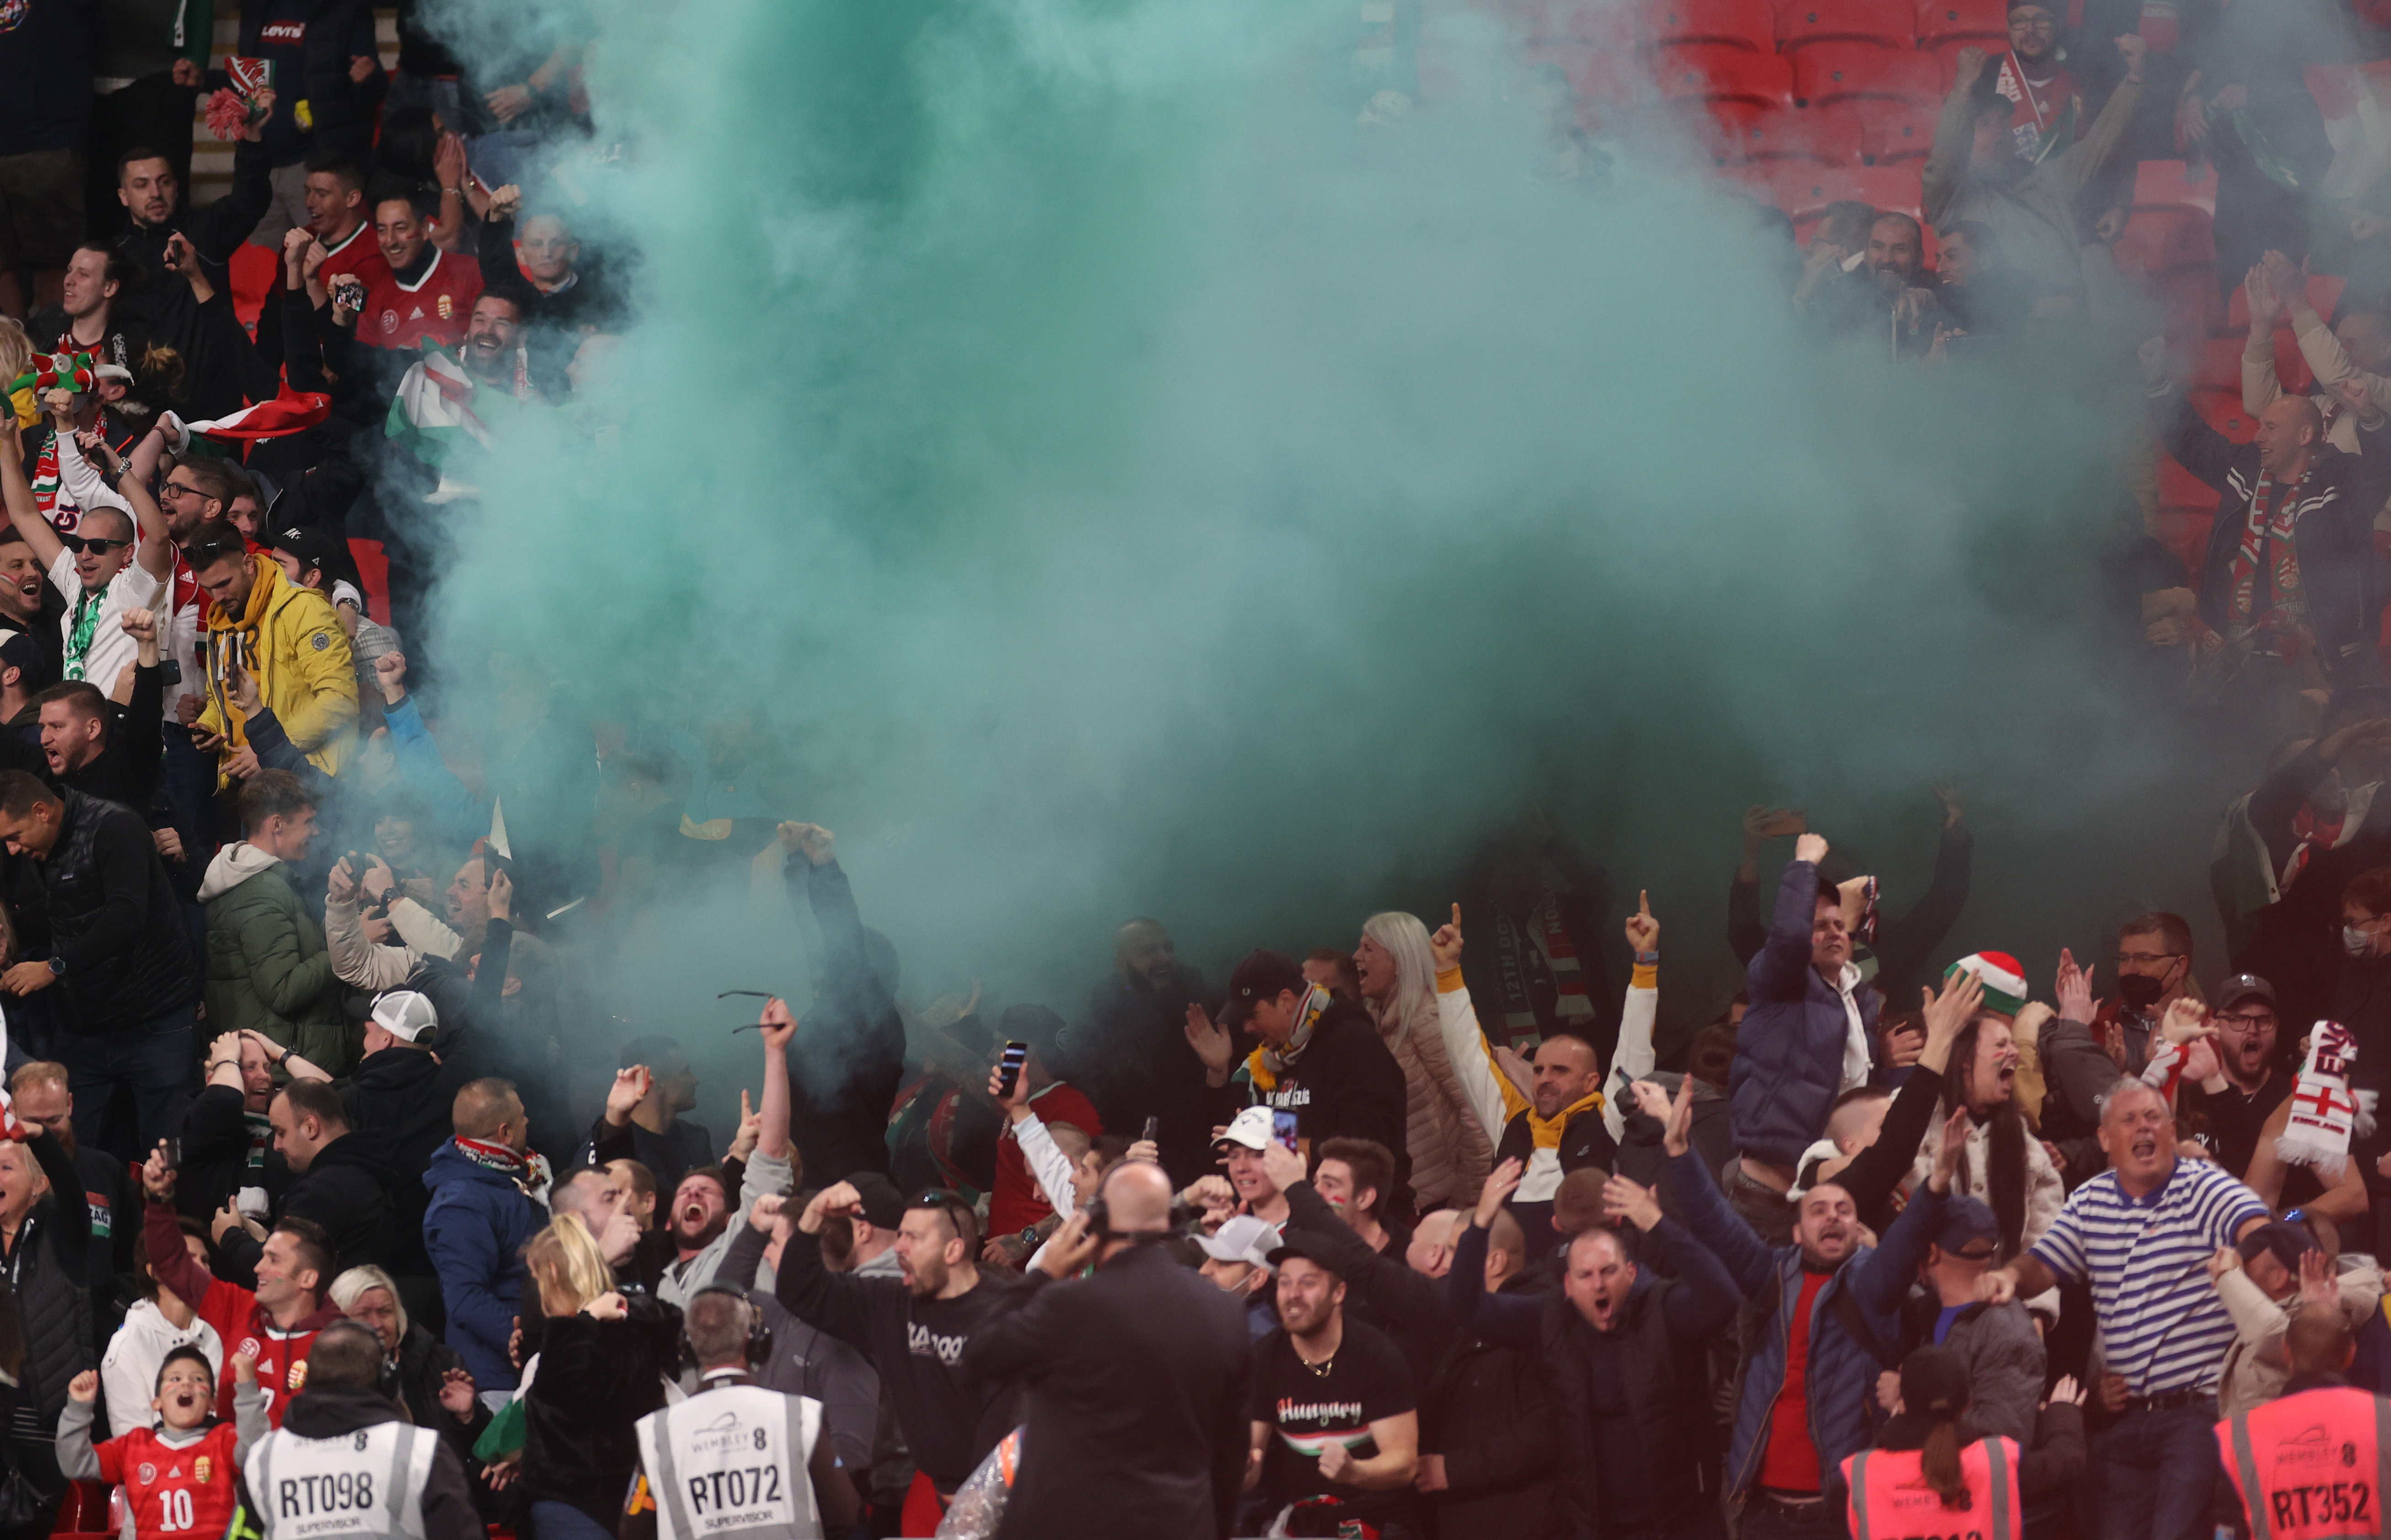 Soccer Football - World Cup - UEFA Qualifiers - Group I - England v Hungary - Wembley Stadium, London, Britain - October 12, 2021 Hungary fans celebrate with flares after Roland Sallai scores their first goal Action Images via Reuters/Carl Recine/File Photo